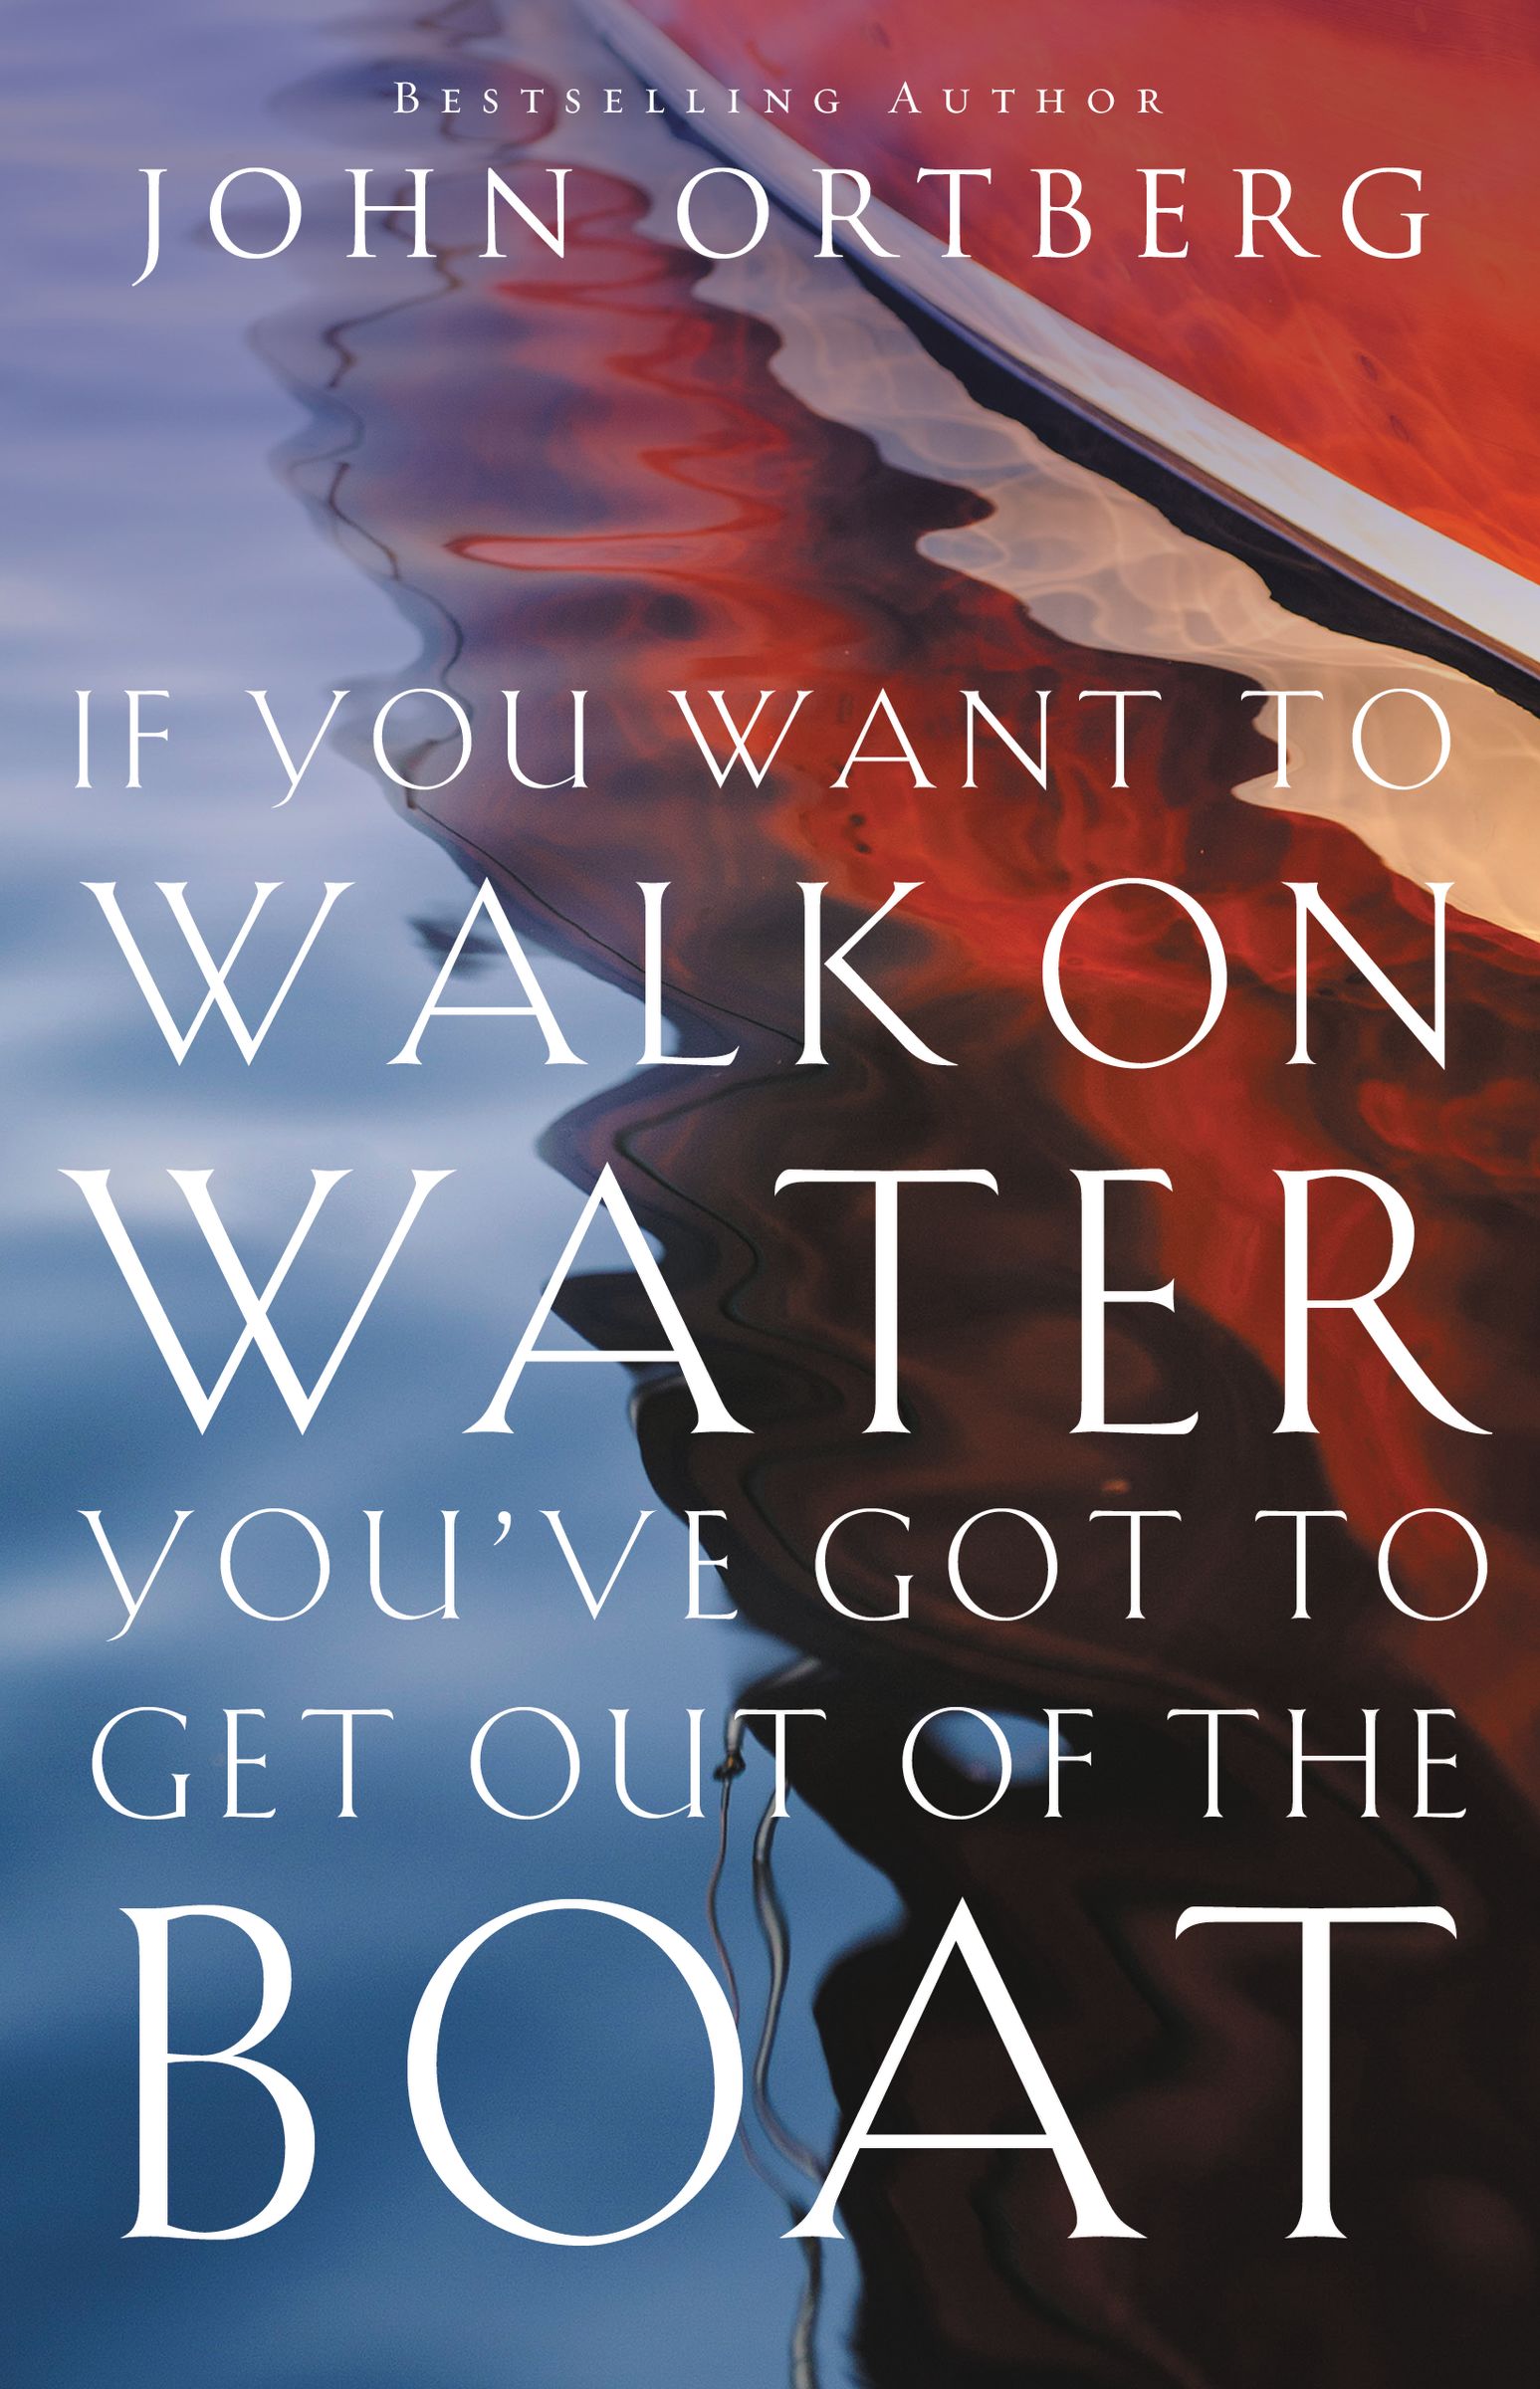 If You Want to Walk on Water, You've Got to Get Out of the Boat - 10-14.99